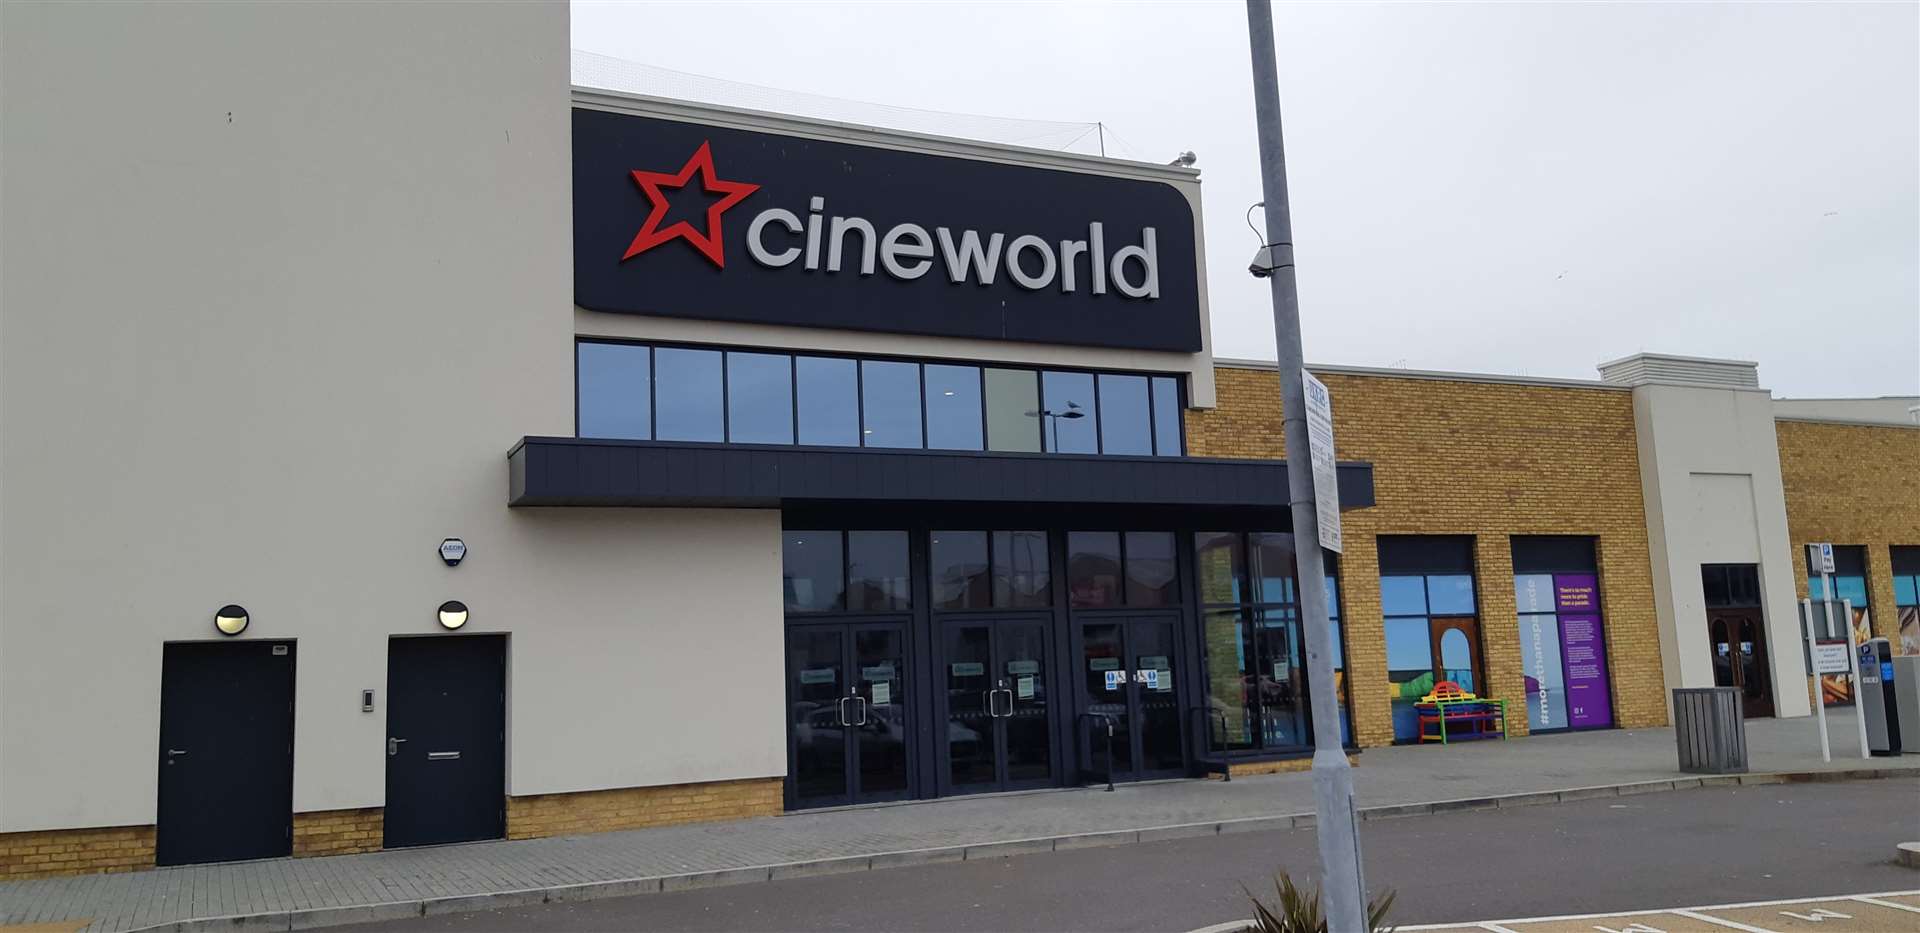 Cineworld opened at the St James development in Dover in 2018 as the flagship attraction and the town's first-ever multiplex cinema